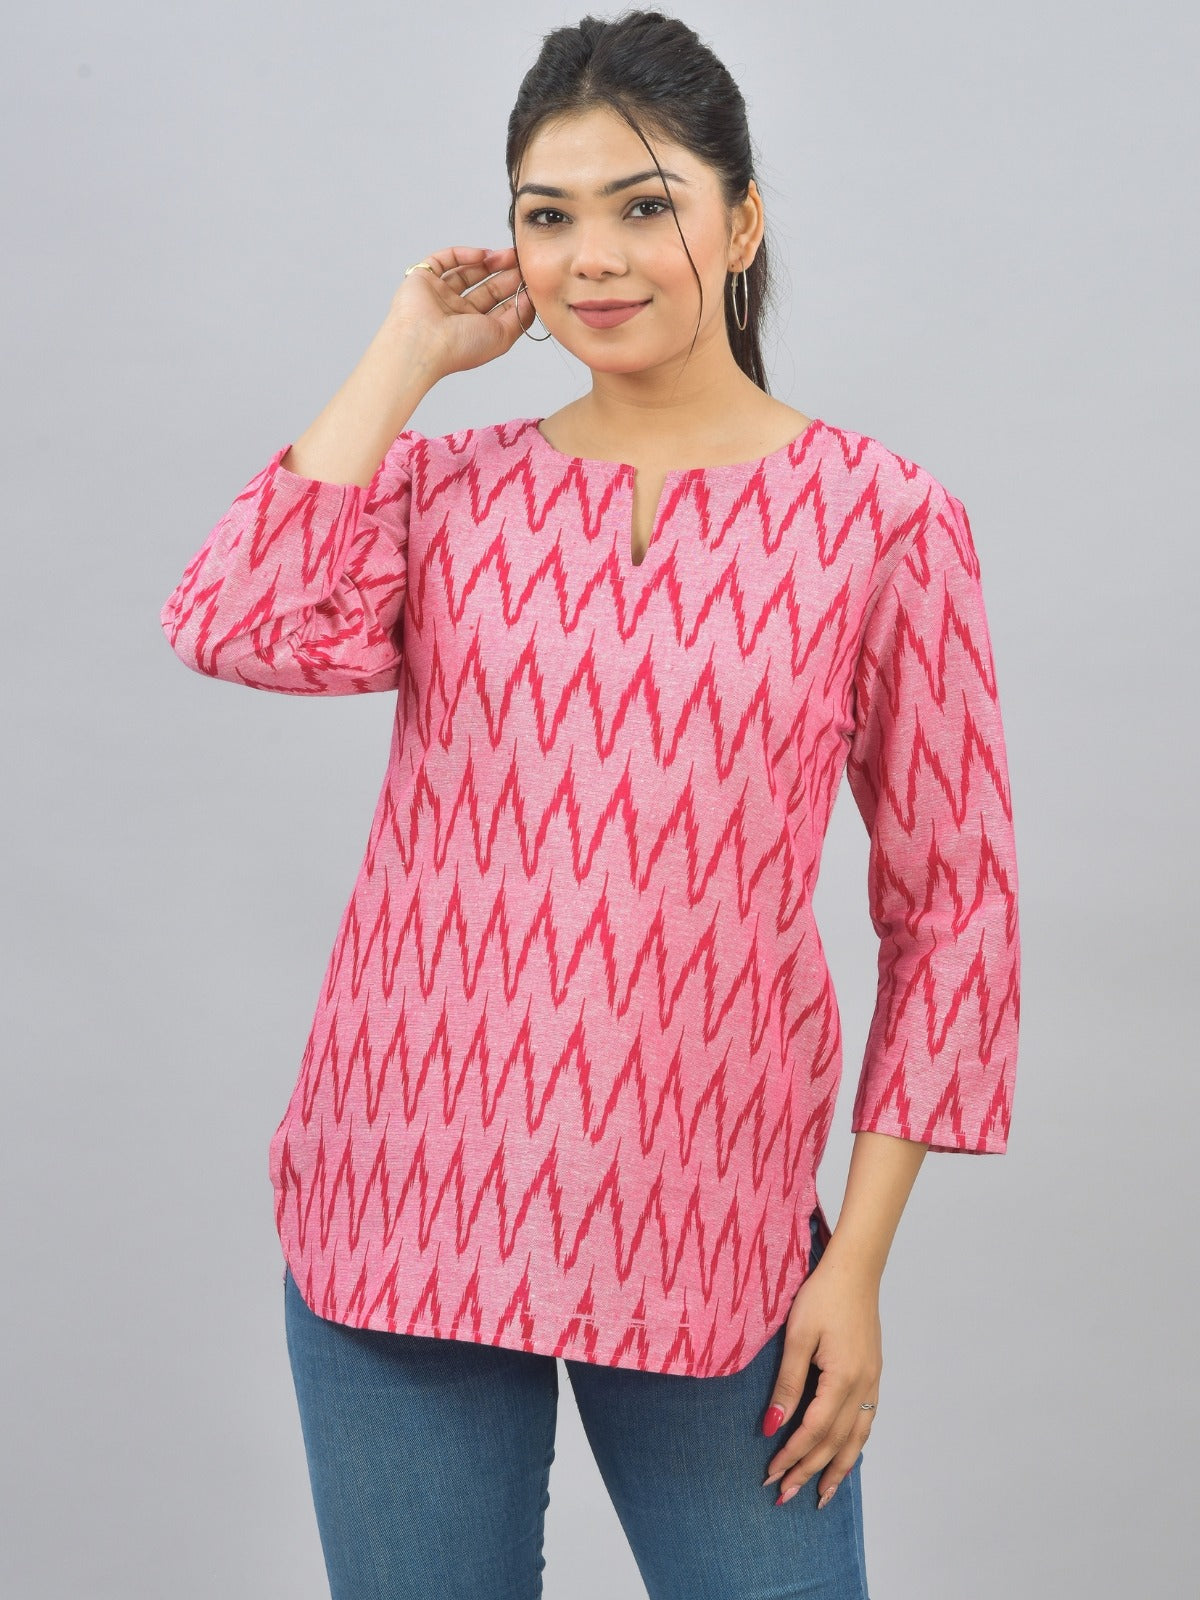 Pack Of 2 Womens Regular Fit Black Tribal And Pink Zig Zag Printed Tops Combo